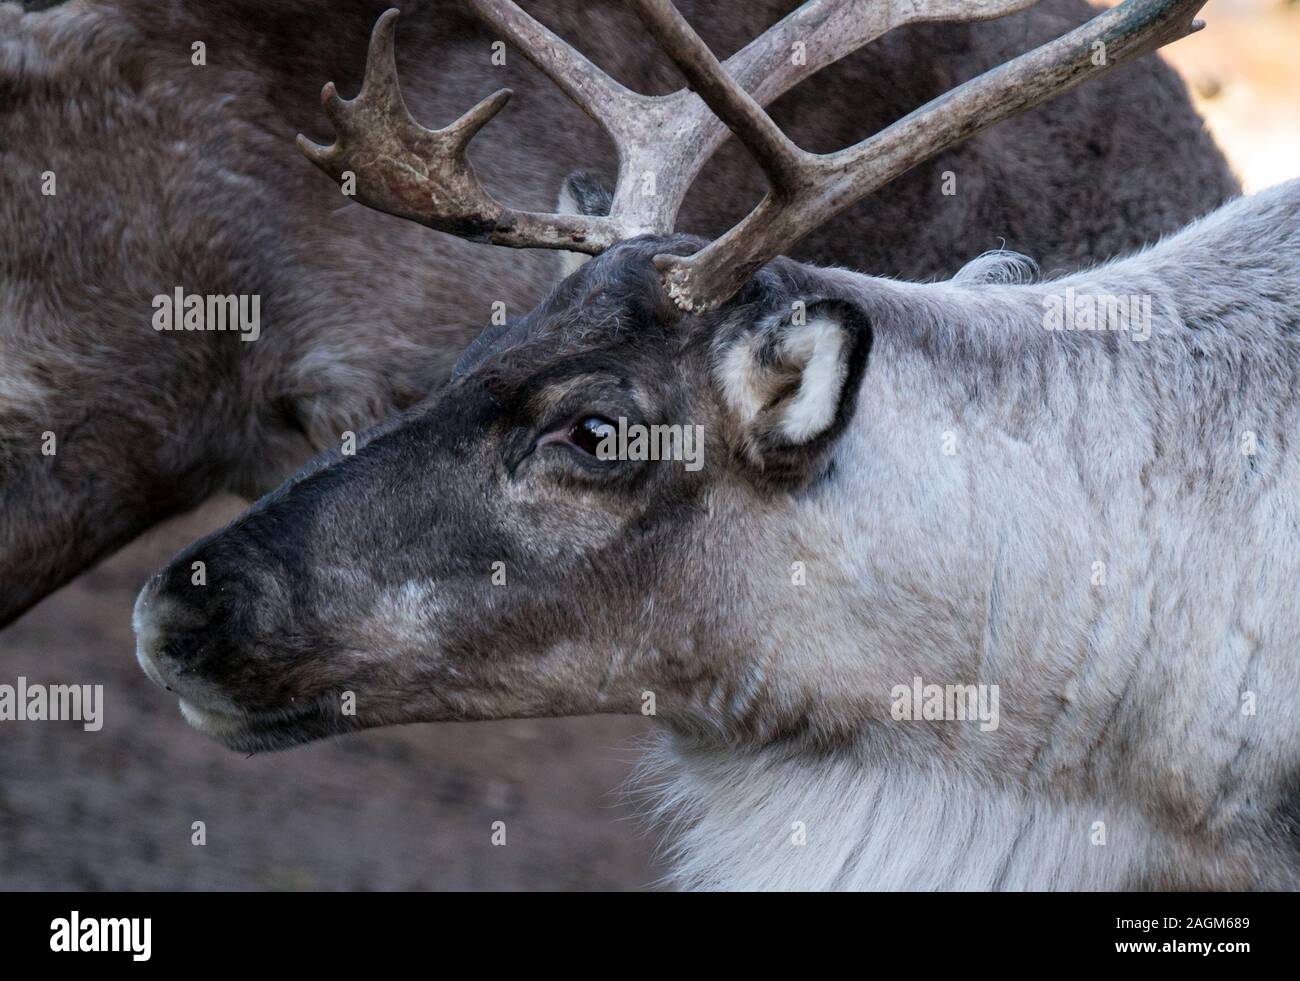 20 December 2019, Saxony-Anhalt, Halle (Saale): A reindeer from the farm on the Goldberg in Halle/Saale walks through the enclosure. A trader from the Finnish village of the Christmas market in Halle brought the animals a treat. The polar moss jäkälä from the Finnish island of Hailouto (2400 kilometres from Halle), is particularly fond of the animals. The reindeer come from Halle's Finnish twin city Oulu. Photo: Hendrik Schmidt/dpa-Zentralbild/ZB Stock Photo